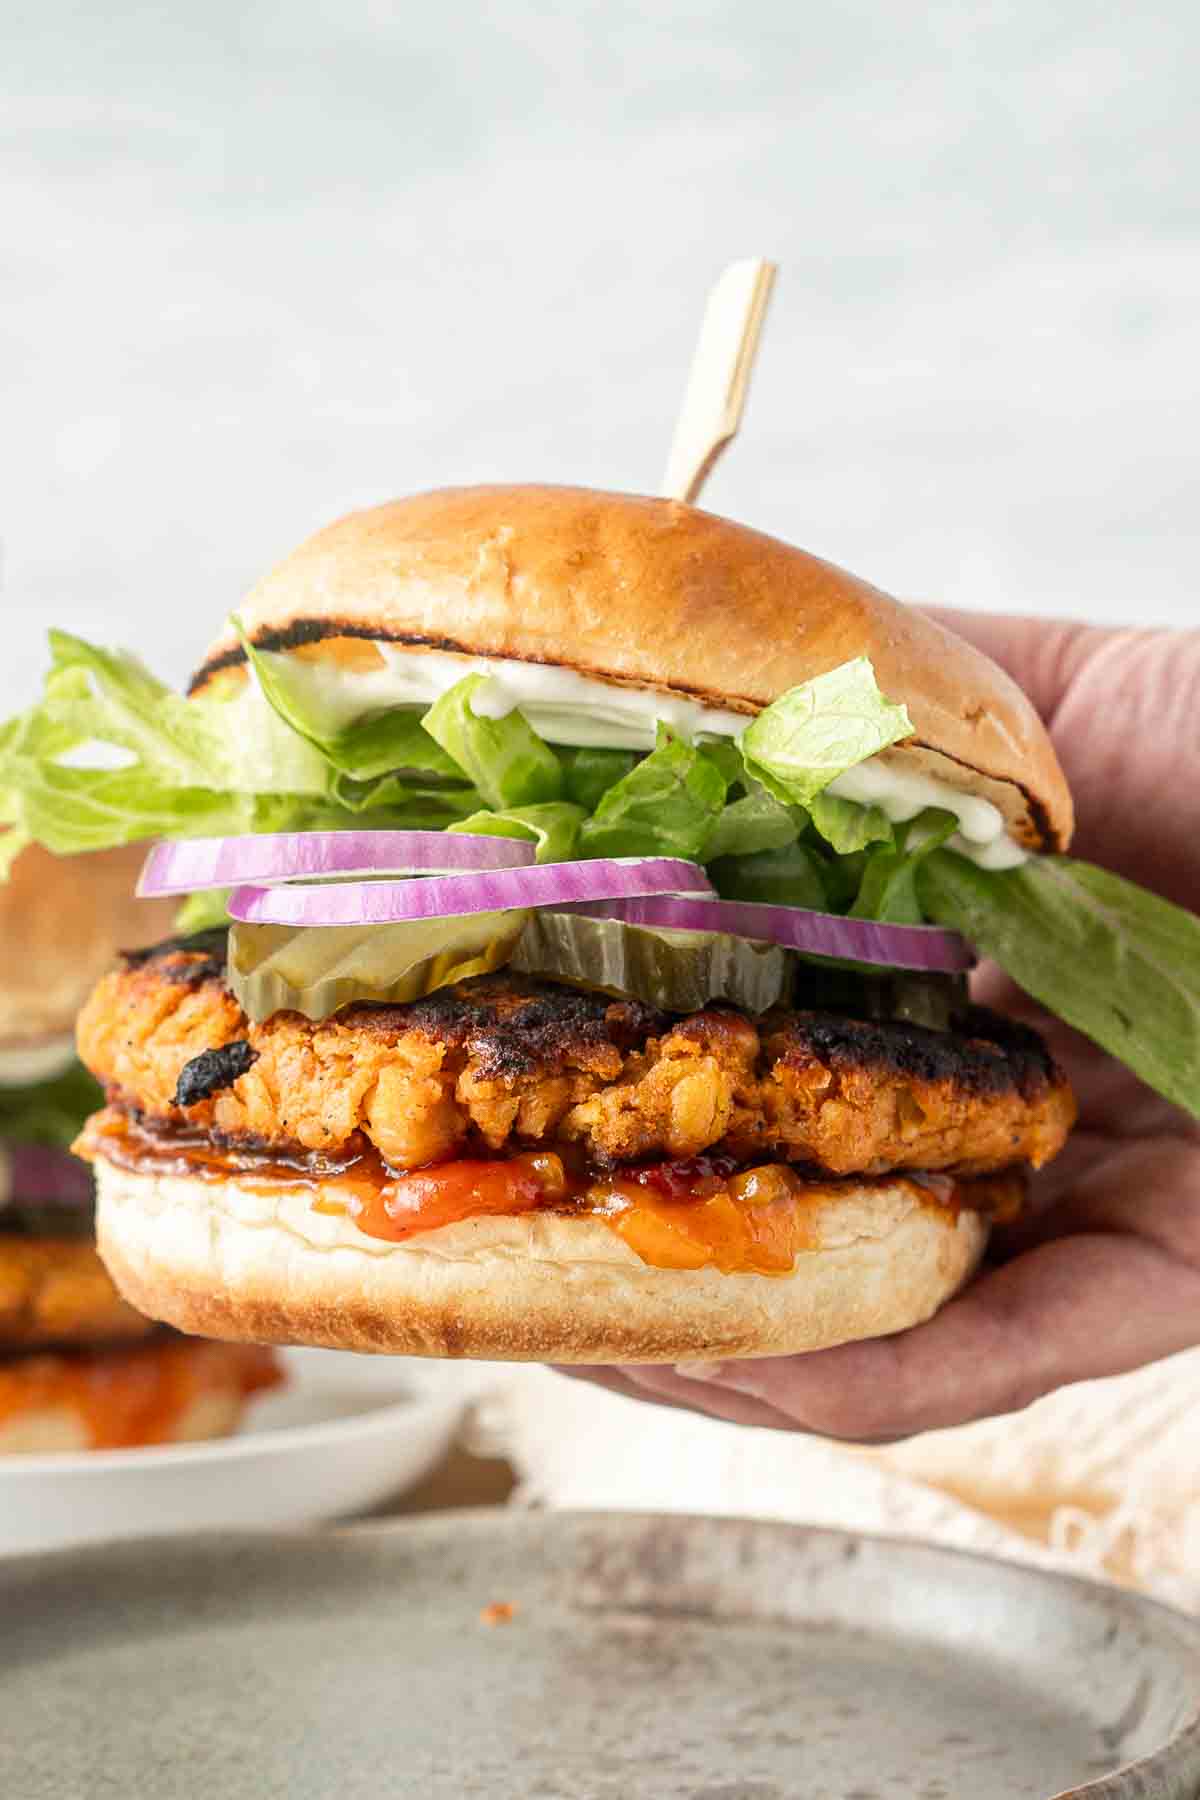 Sweet potato and chickpea burger being held up.